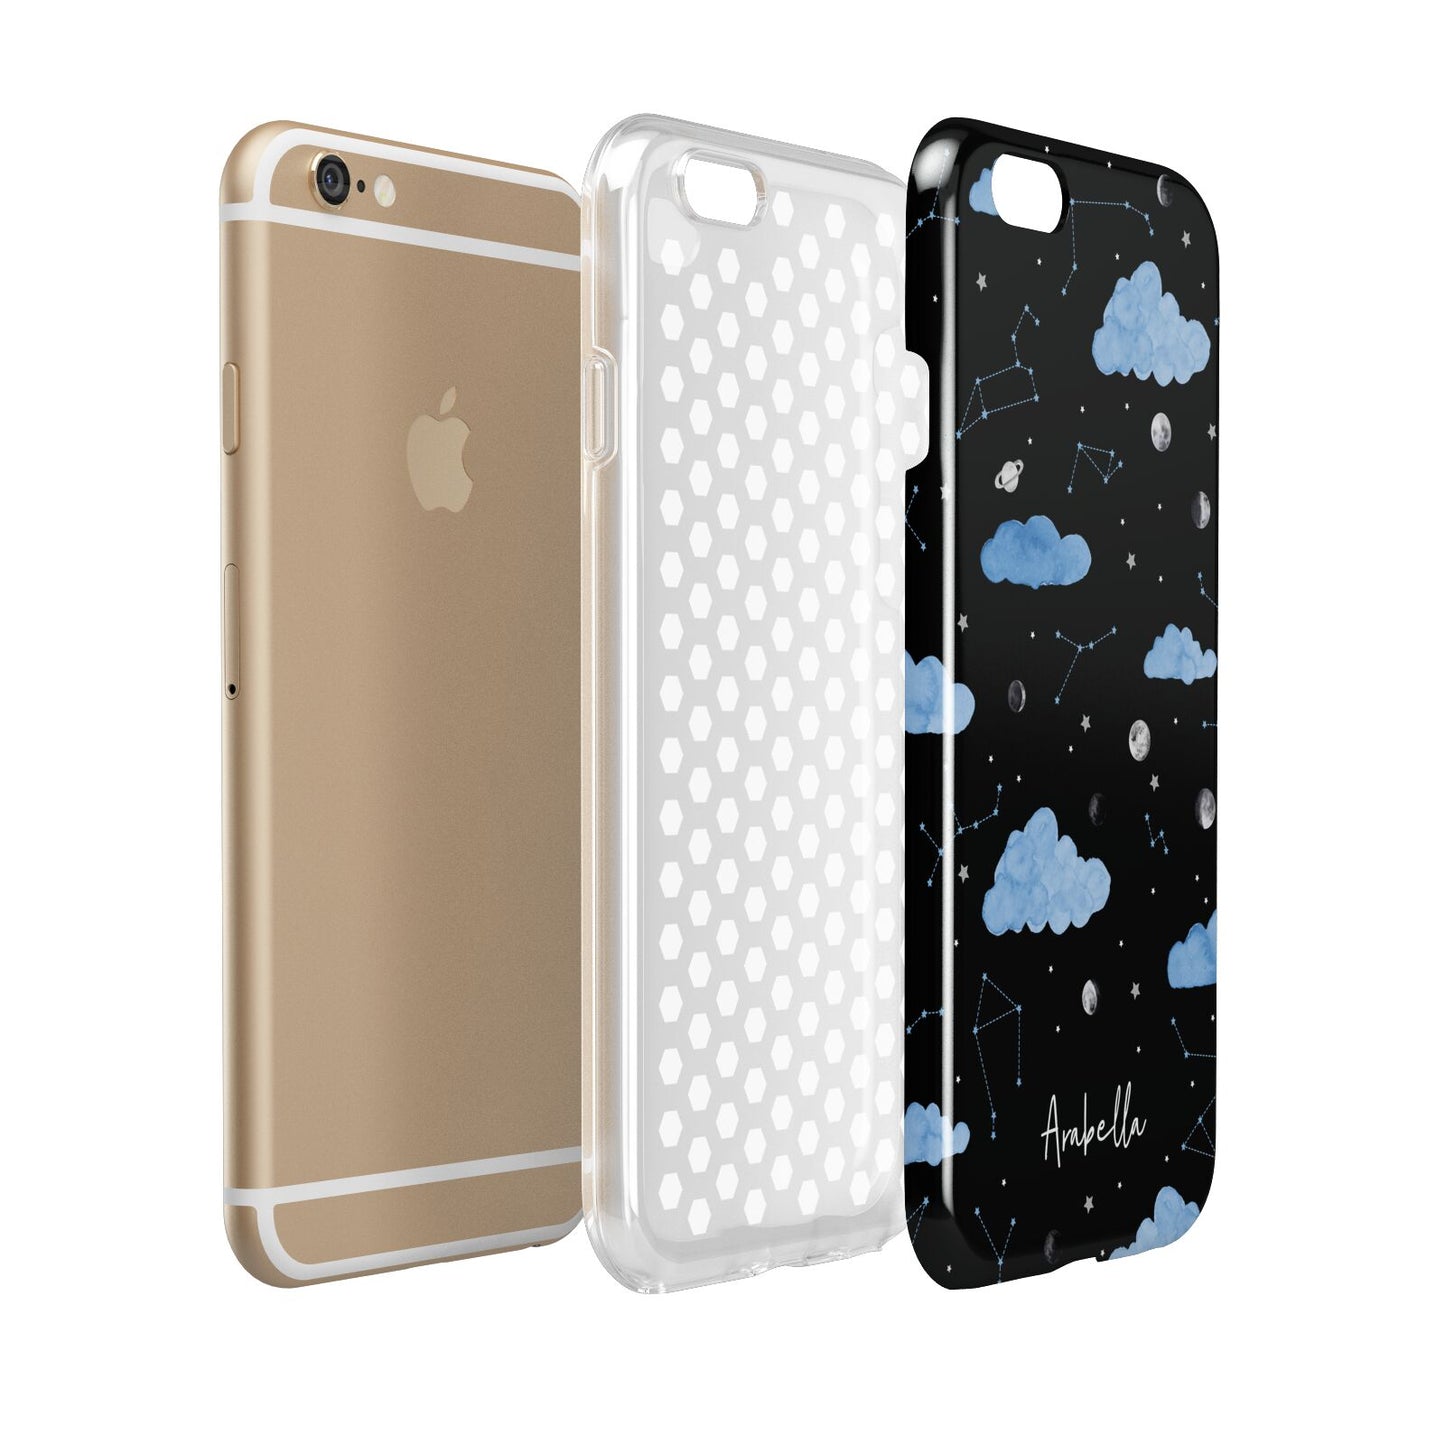 Cloudy Night Sky with Name Apple iPhone 6 3D Tough Case Expanded view